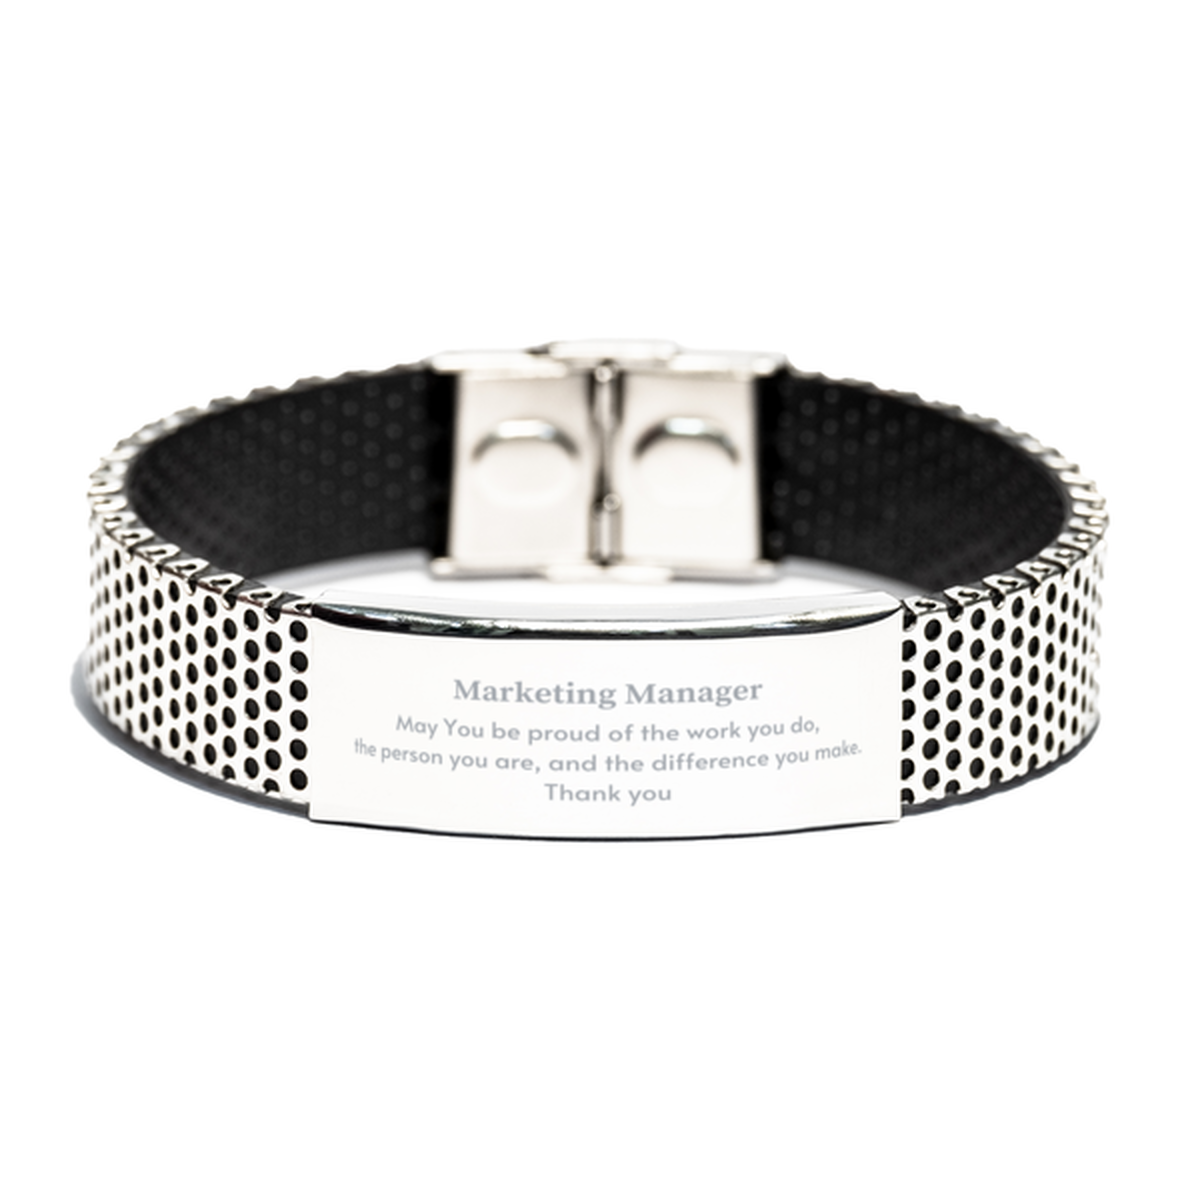 Heartwarming Stainless Steel Bracelet Retirement Coworkers Gifts for Marketing Manager, Marketing Manager May You be proud of the work you do, the person you are Gifts for Boss Men Women Friends